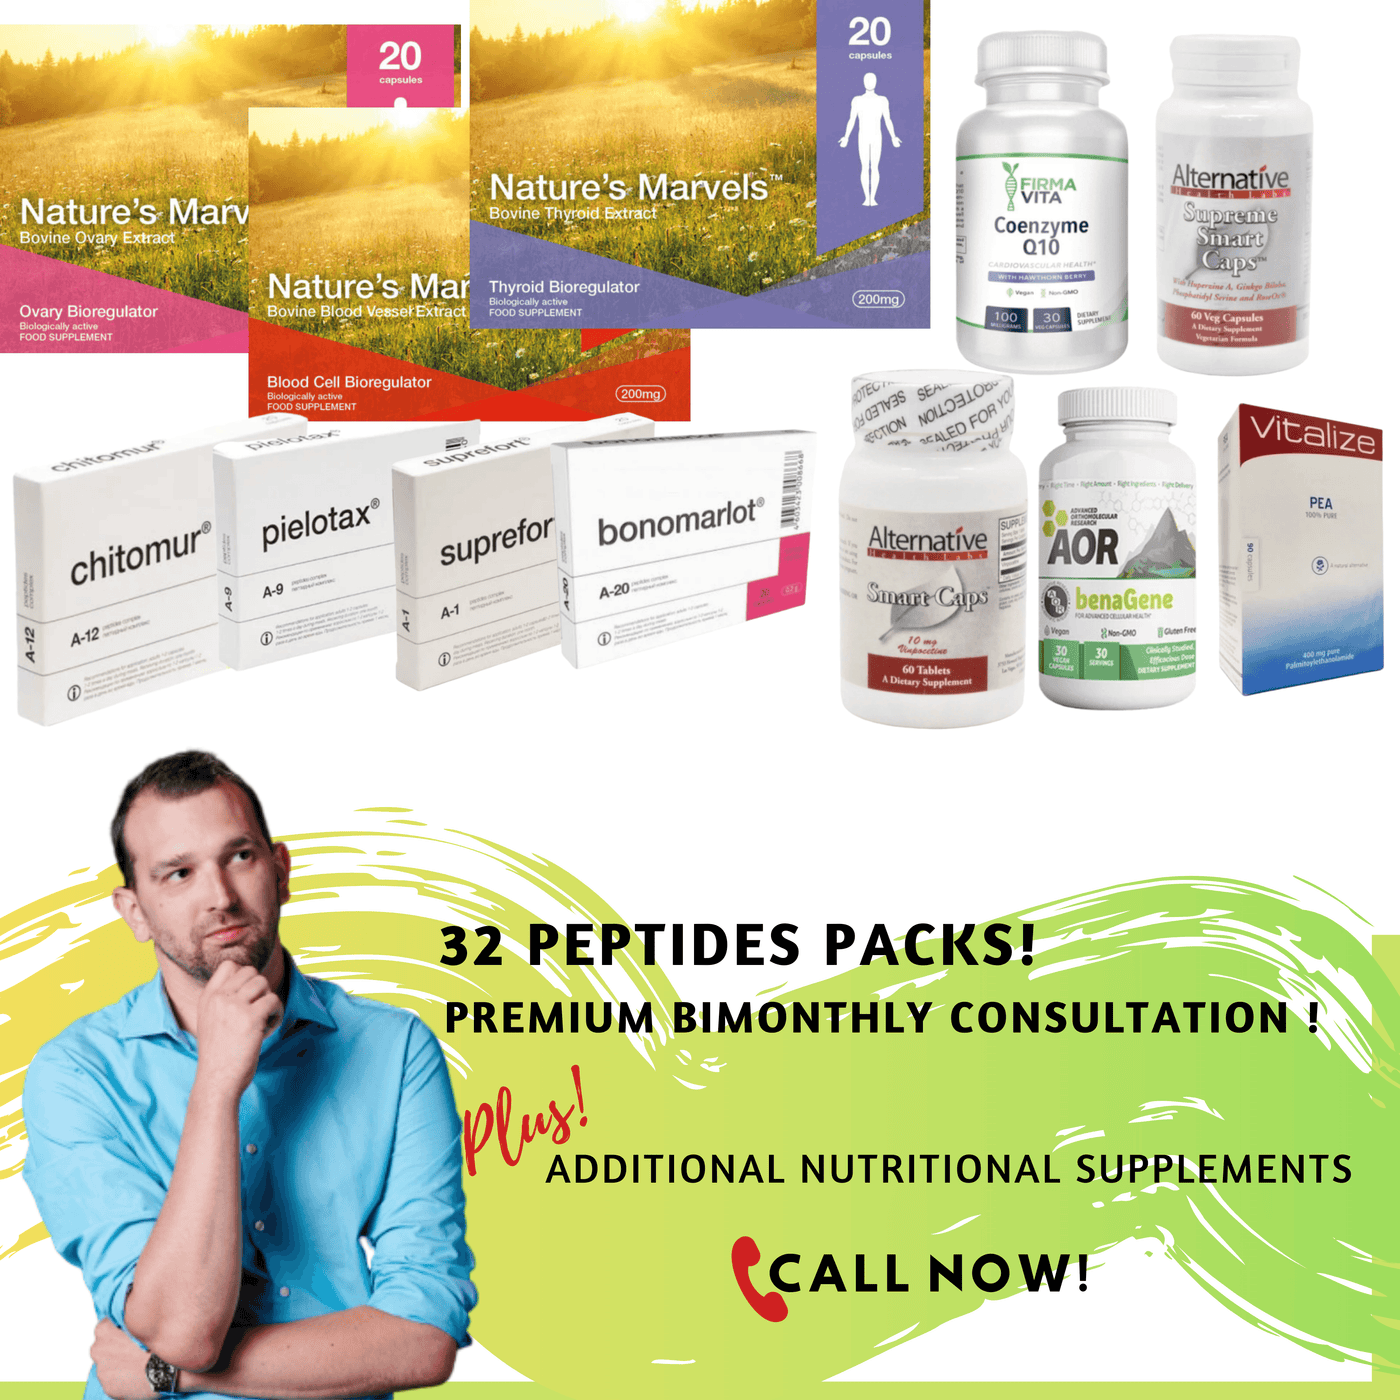 Highway to Health - 6 Month Age Defying Program (32 Peptides)